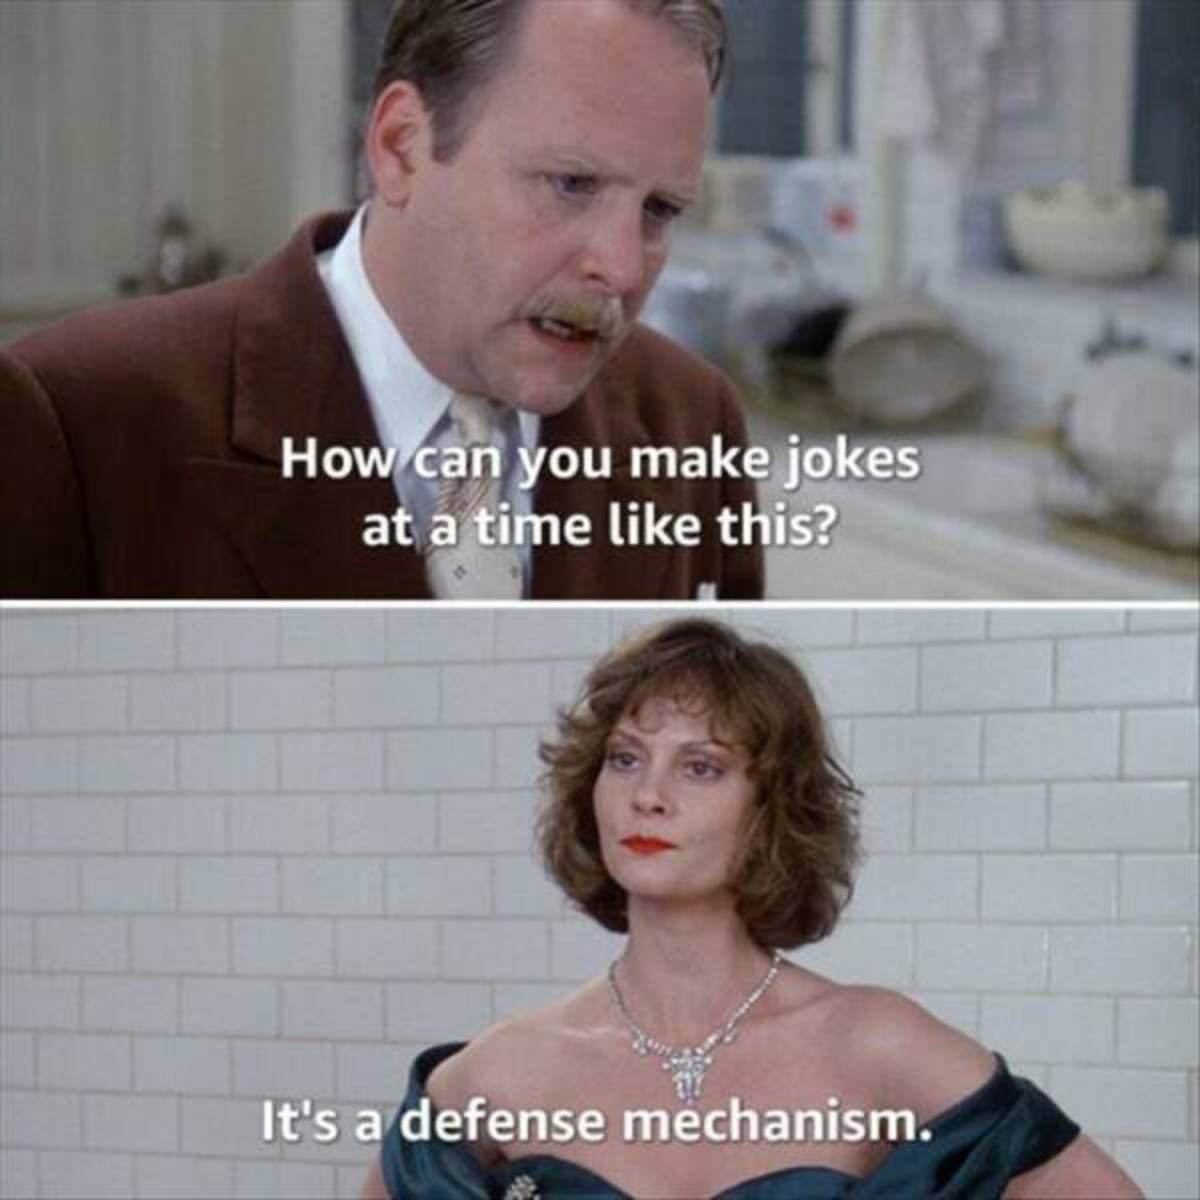 clue quotes - How can you make jokes at a time this? It's a defense mechanism.